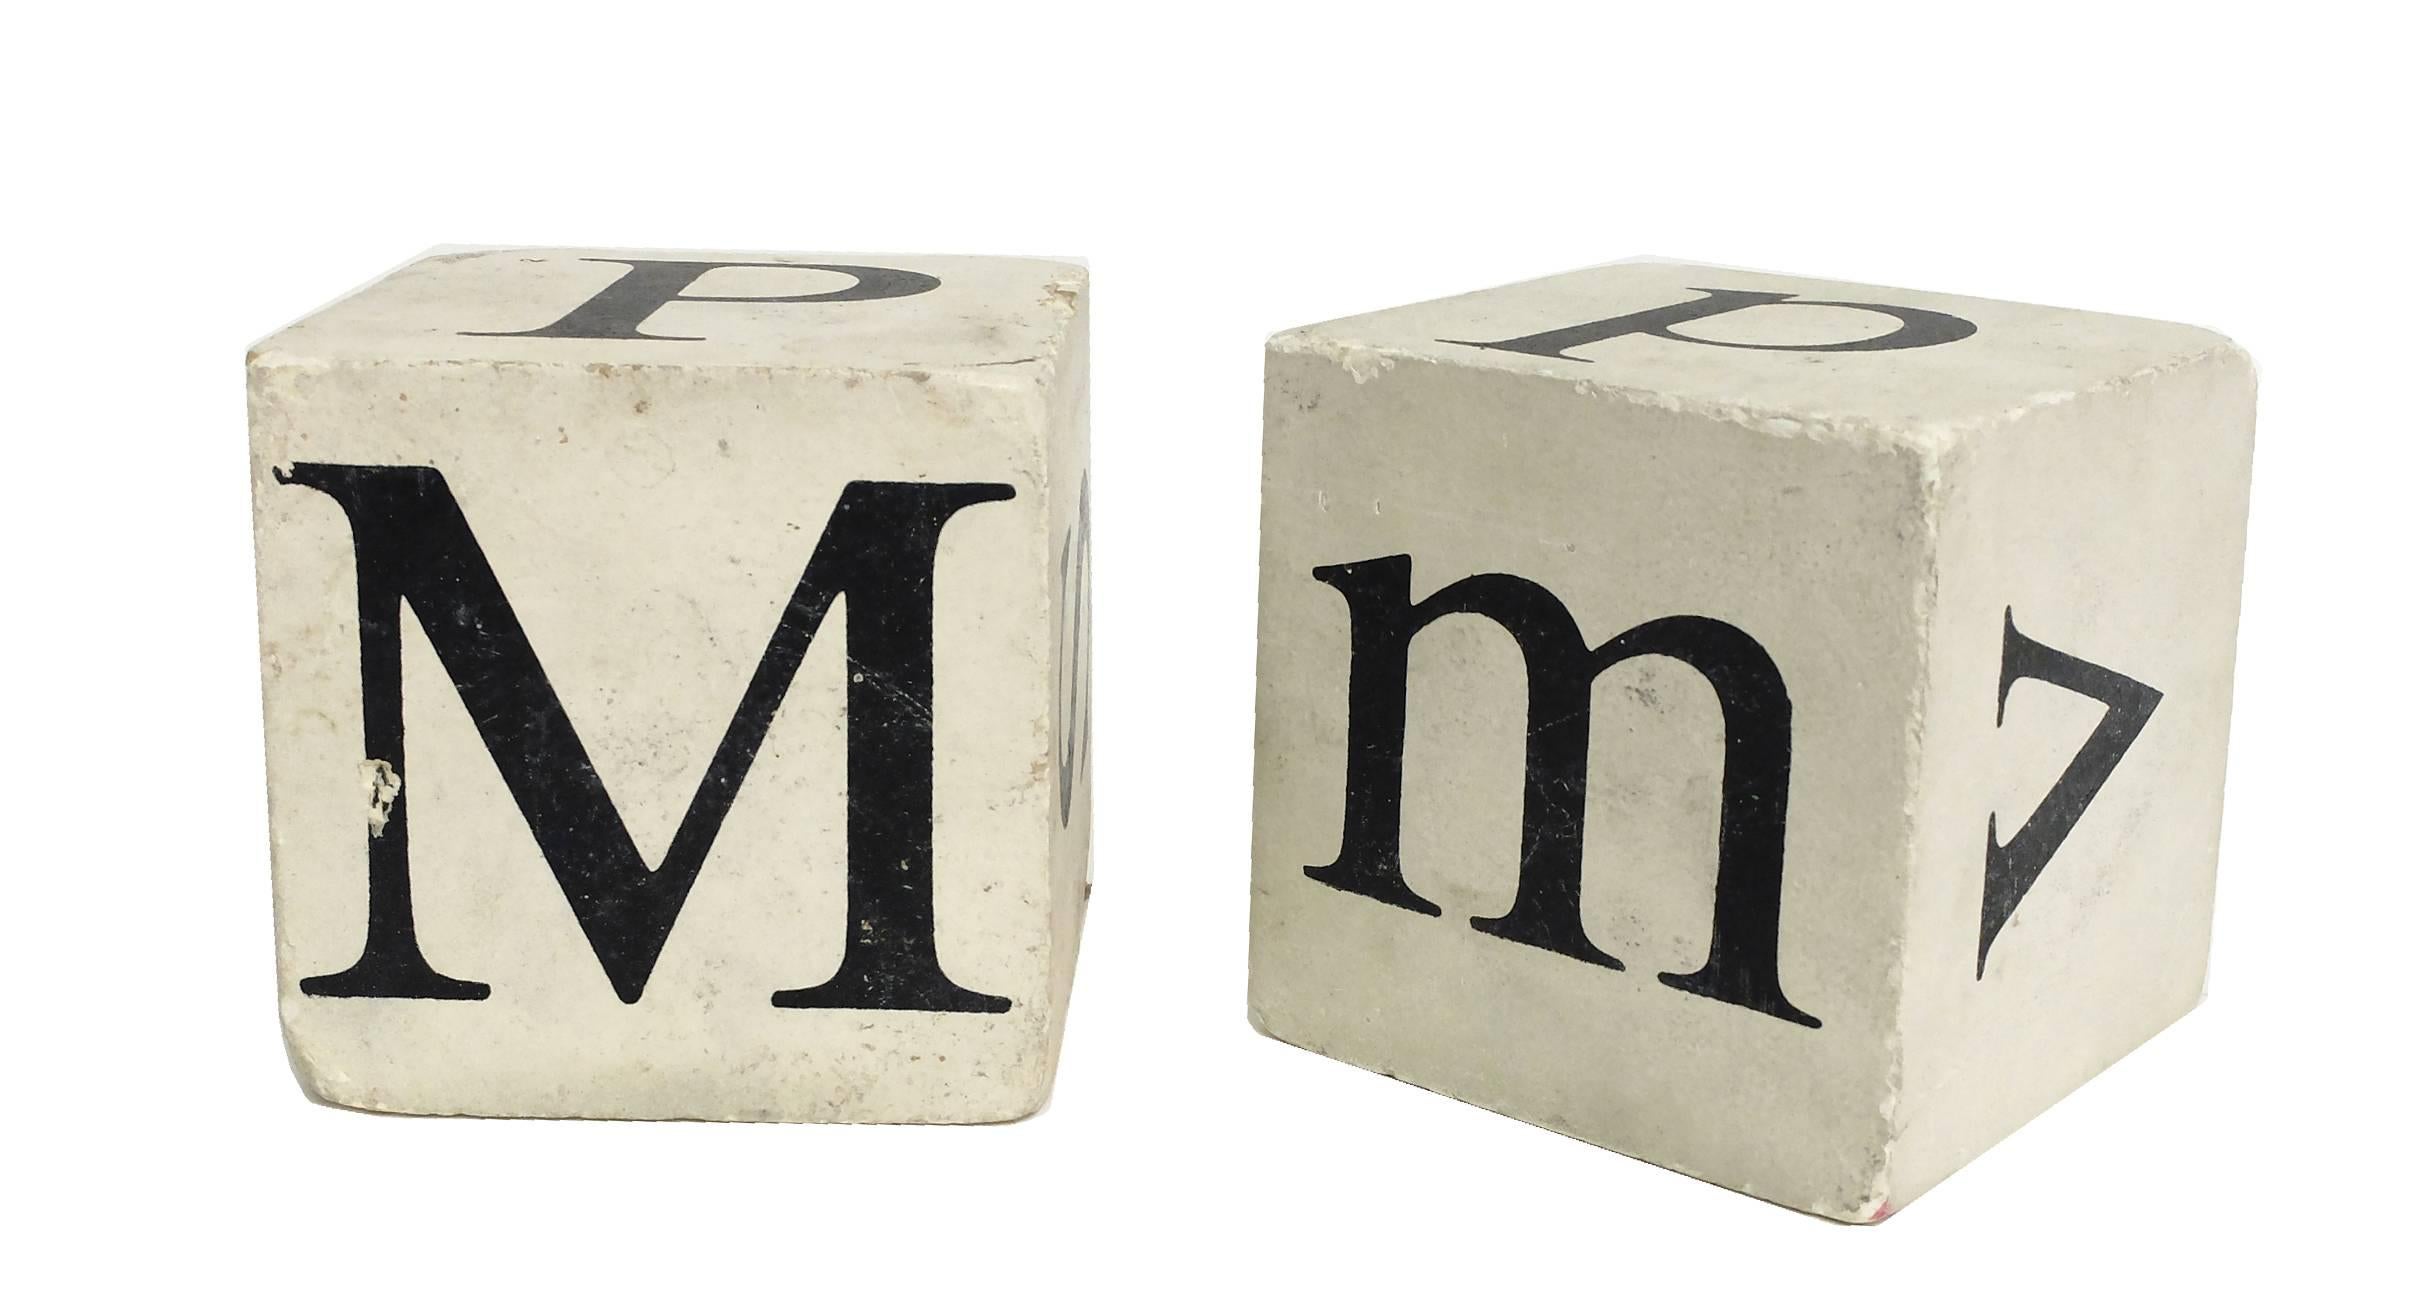 Pair of dice made of papier maché and plaster, painted black on white with different black letters in each face of the cube, USA, circa 1900.